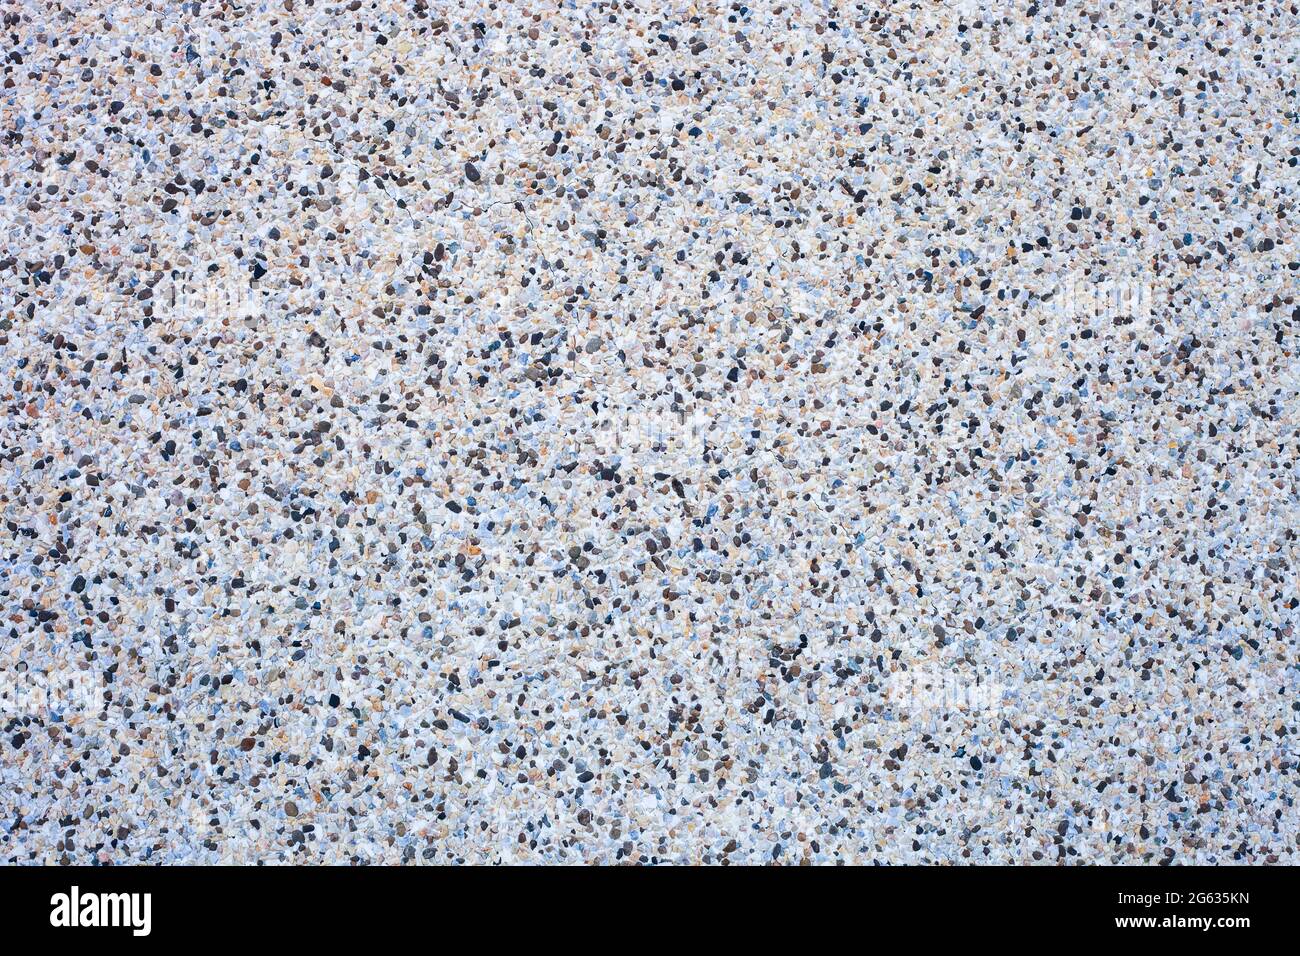 Abstract background decorative mosaic plaster. Stucco backdrop with rocks crumbs. Pebble plaster finishing - surface coating made of small stones Stock Photo